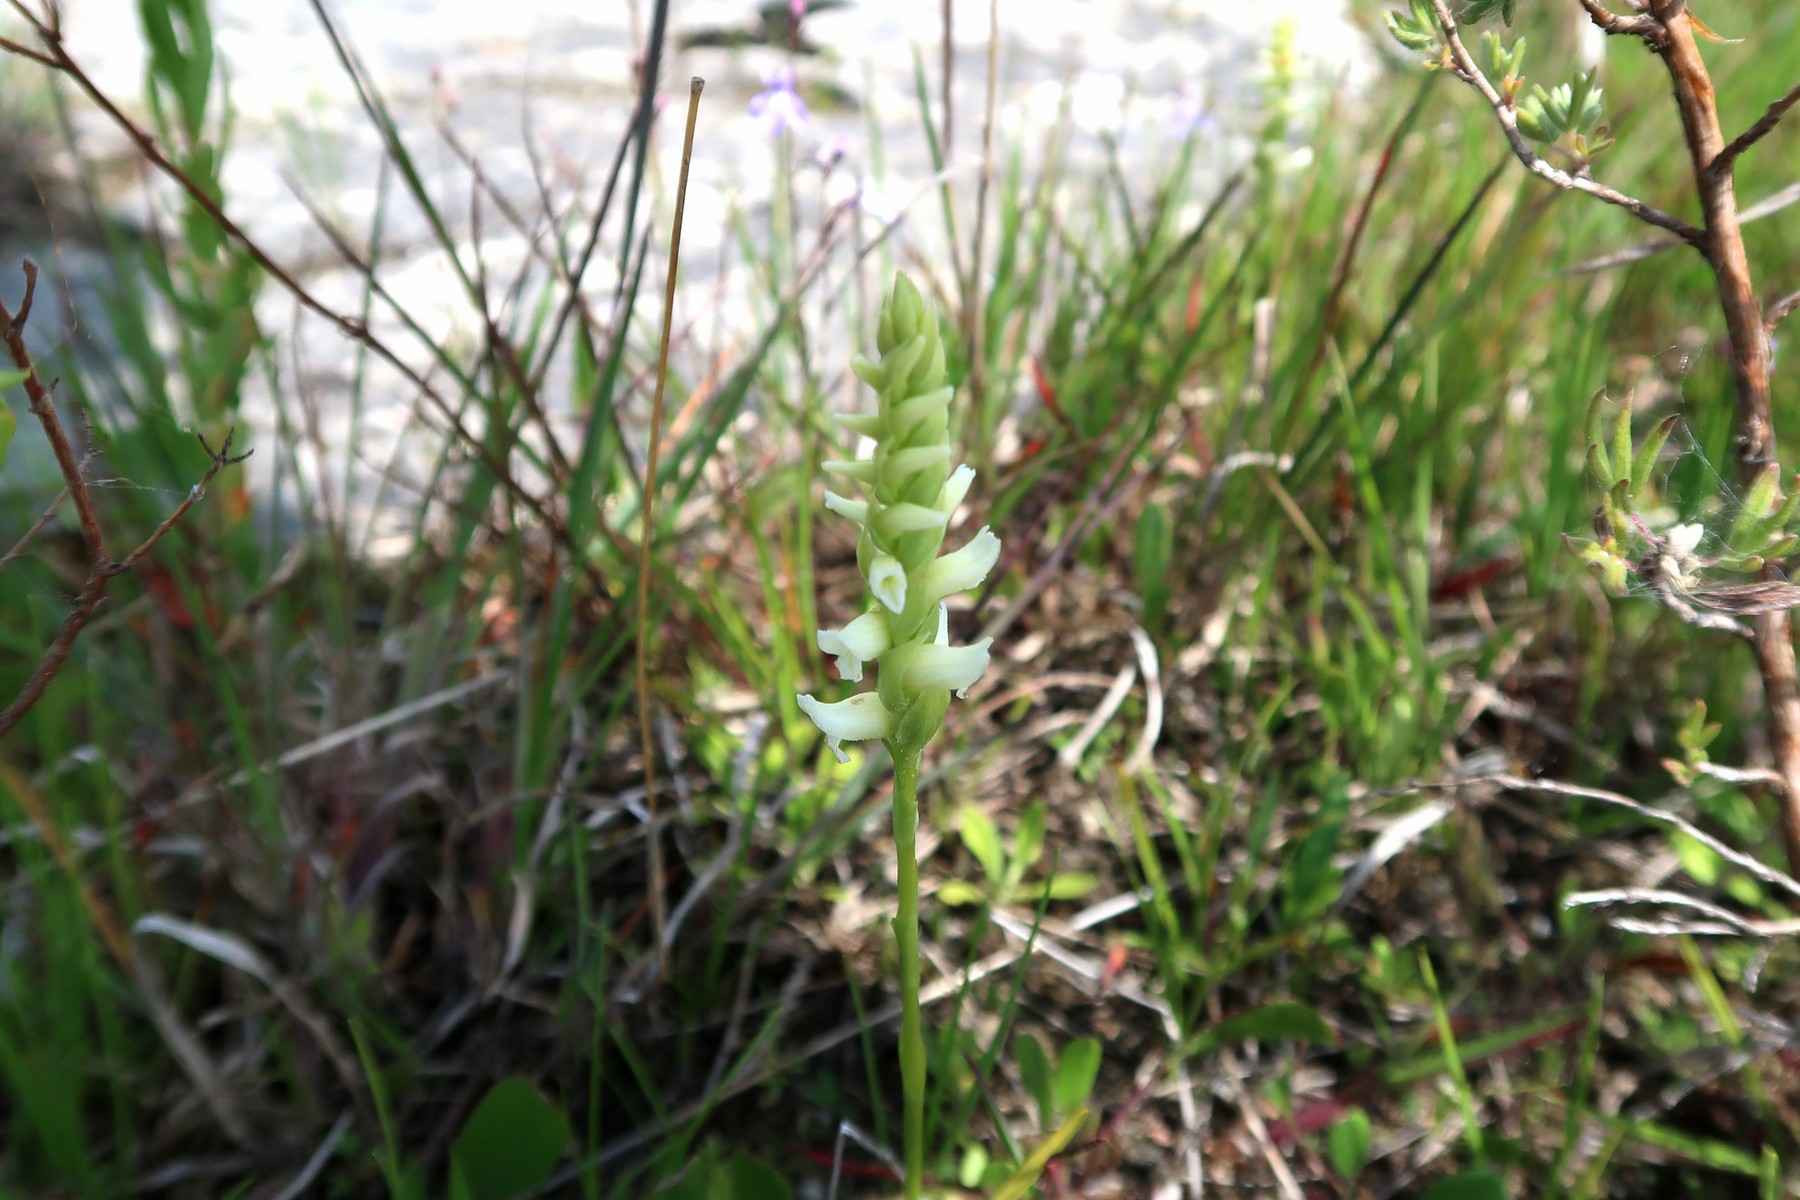 201808021425696 Hooded Ladies-Tresses (Spiranthes romanzoffiana) - Misery Bay Nature Preserve, Manitoulin Island, ON.JPG